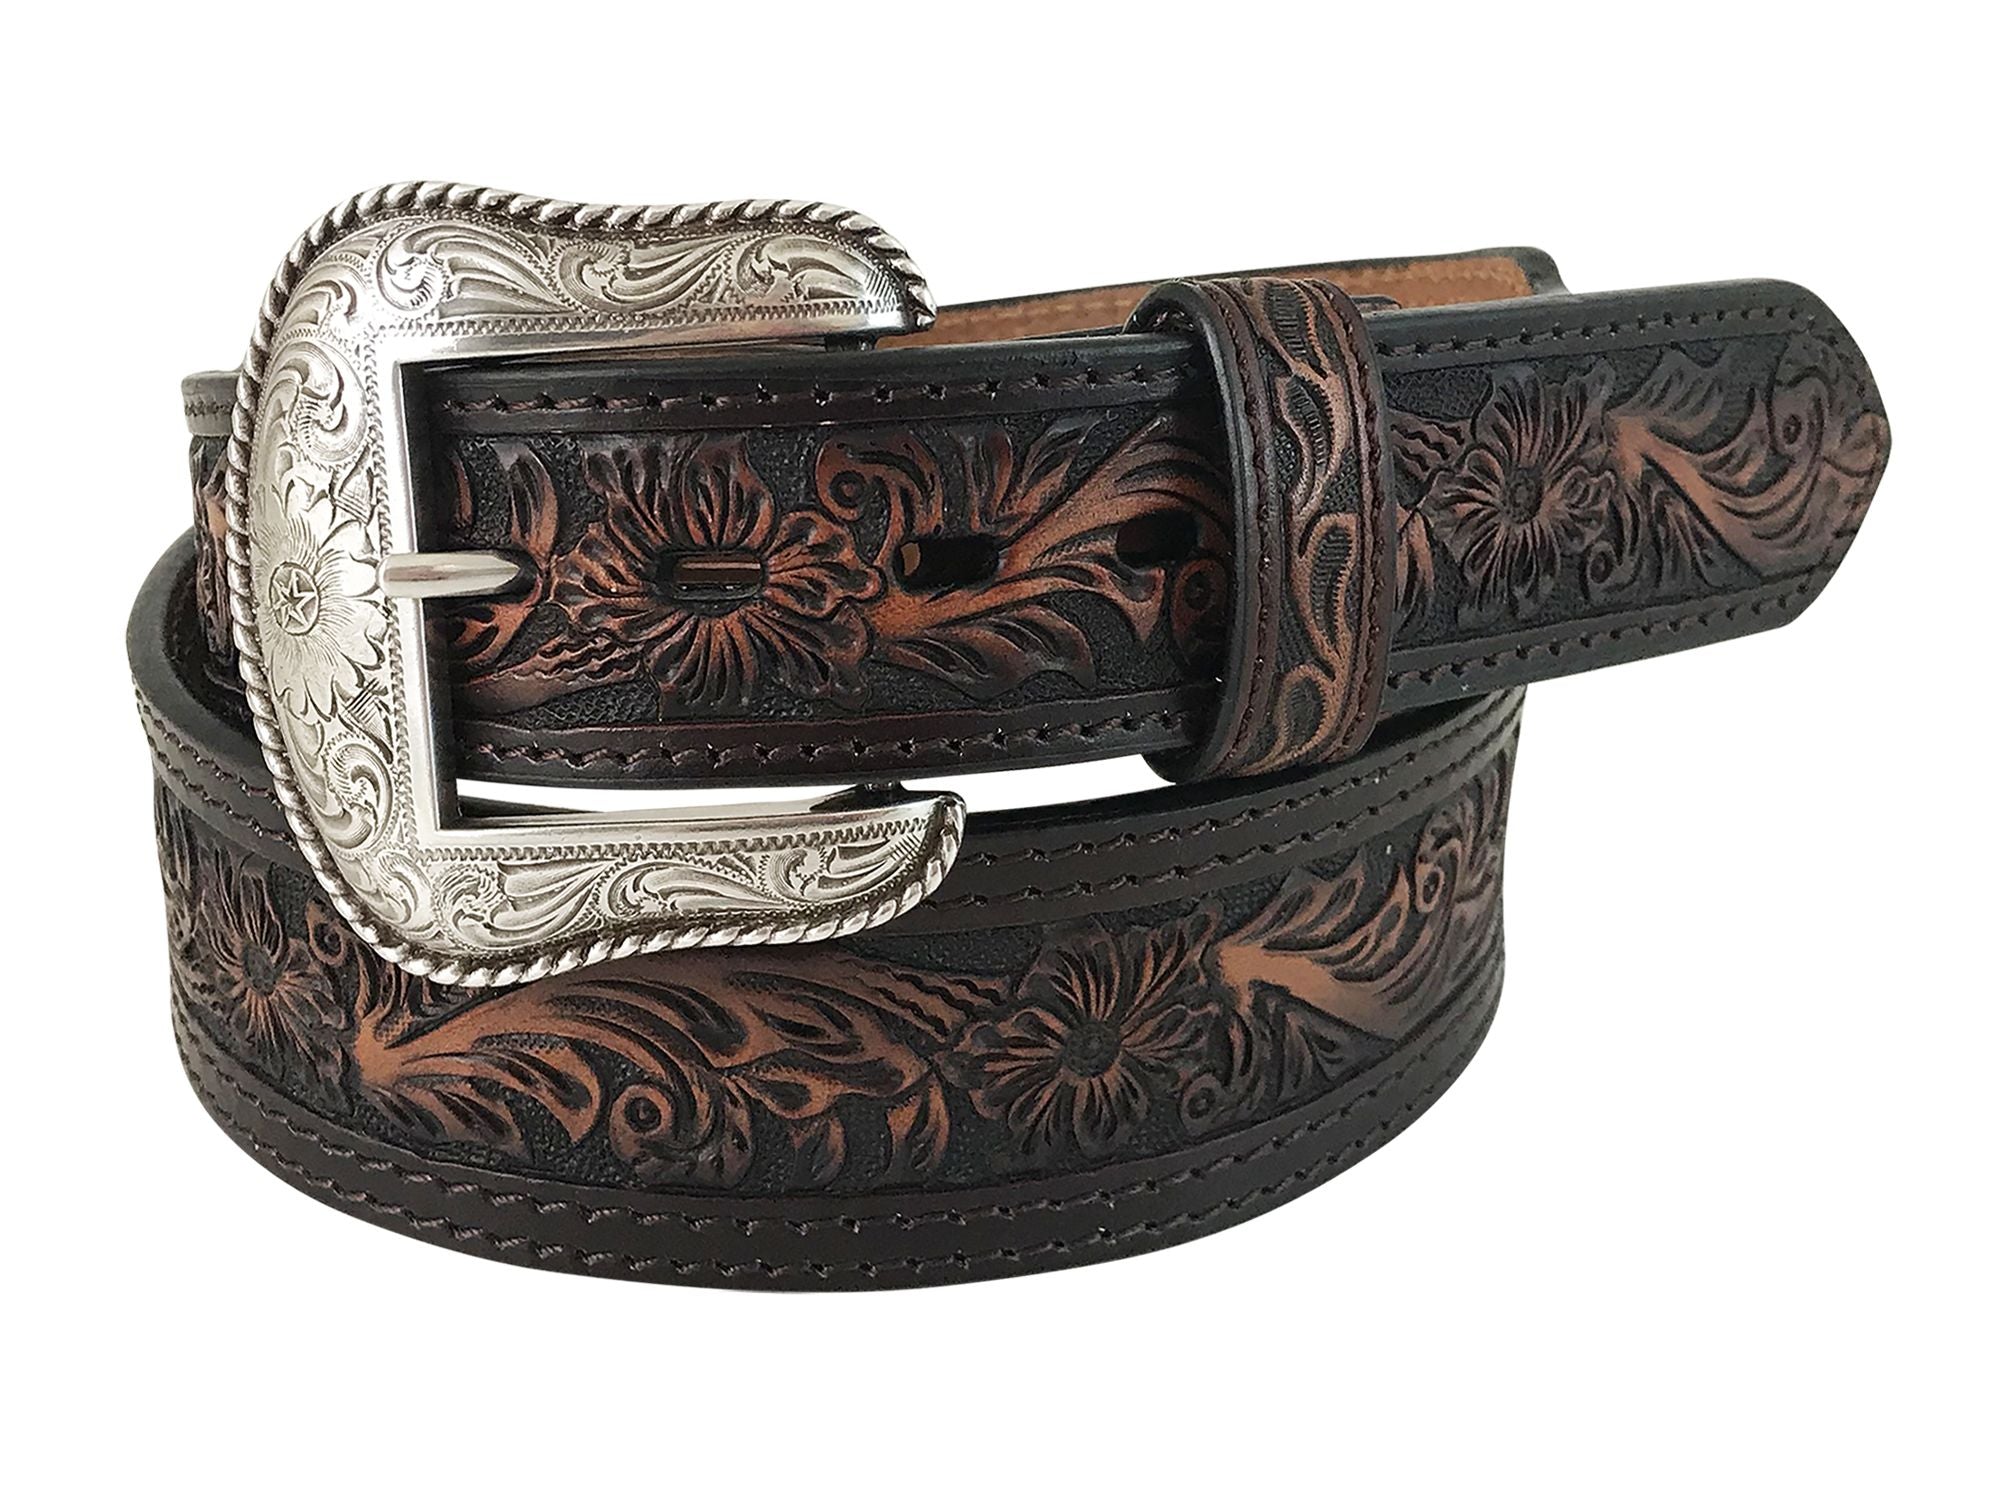 Roper Belt 1.5in Genuine Leather Cutout Floral Tooled Design Cognac/Turquoise